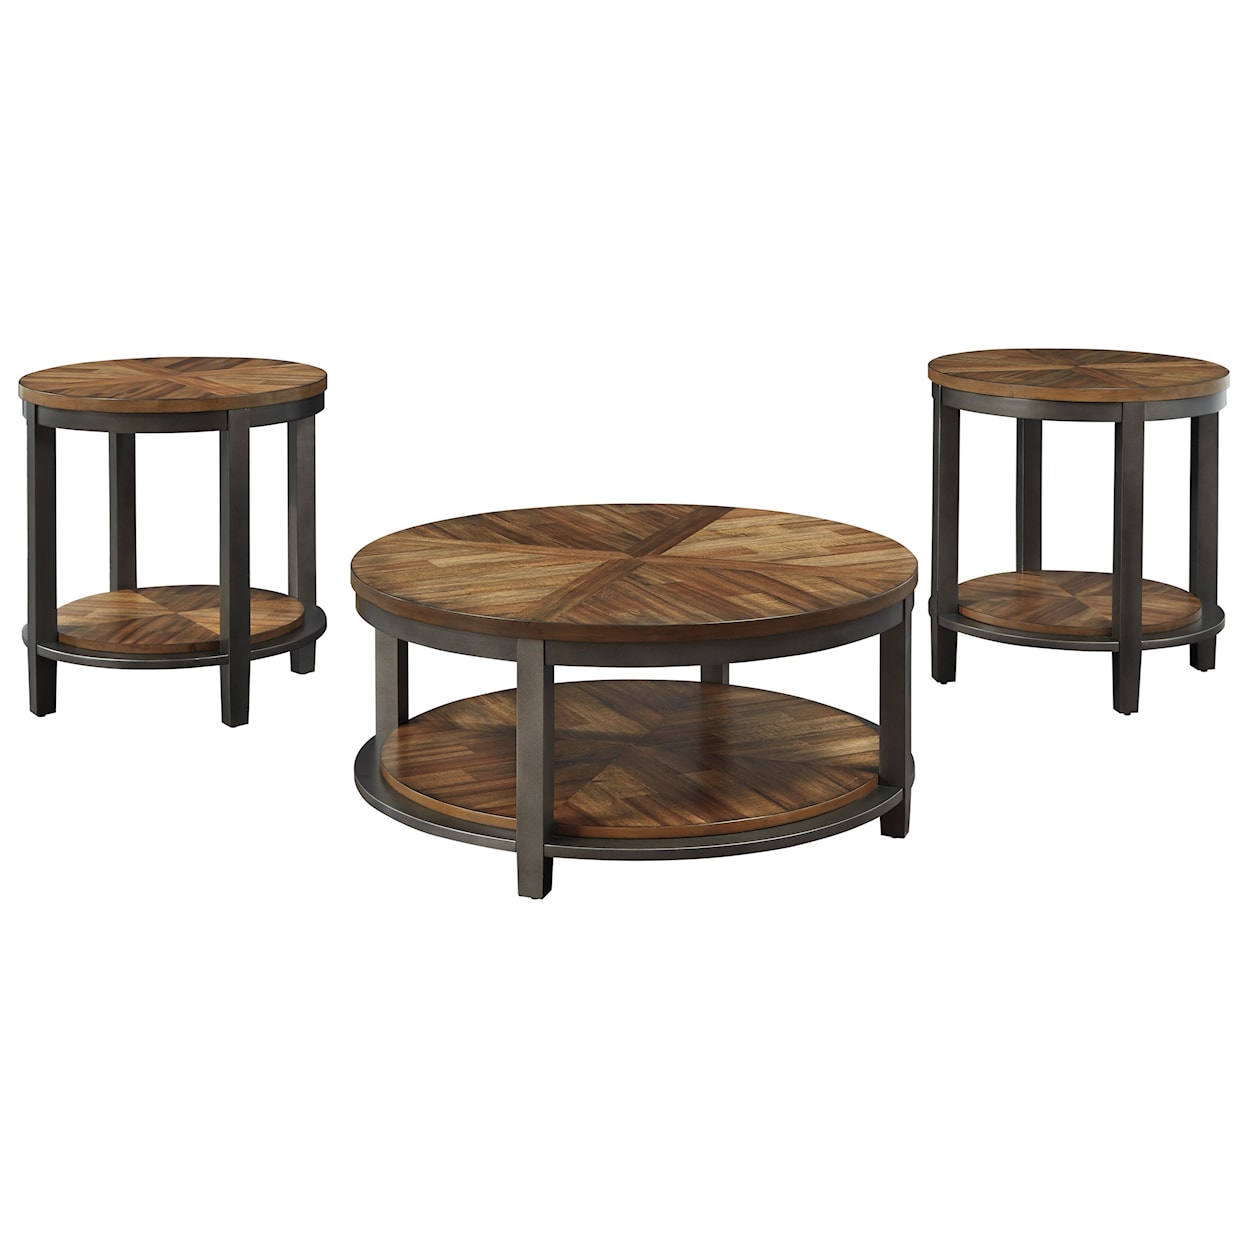 Benchcraft Roybeck Occasional Table Set